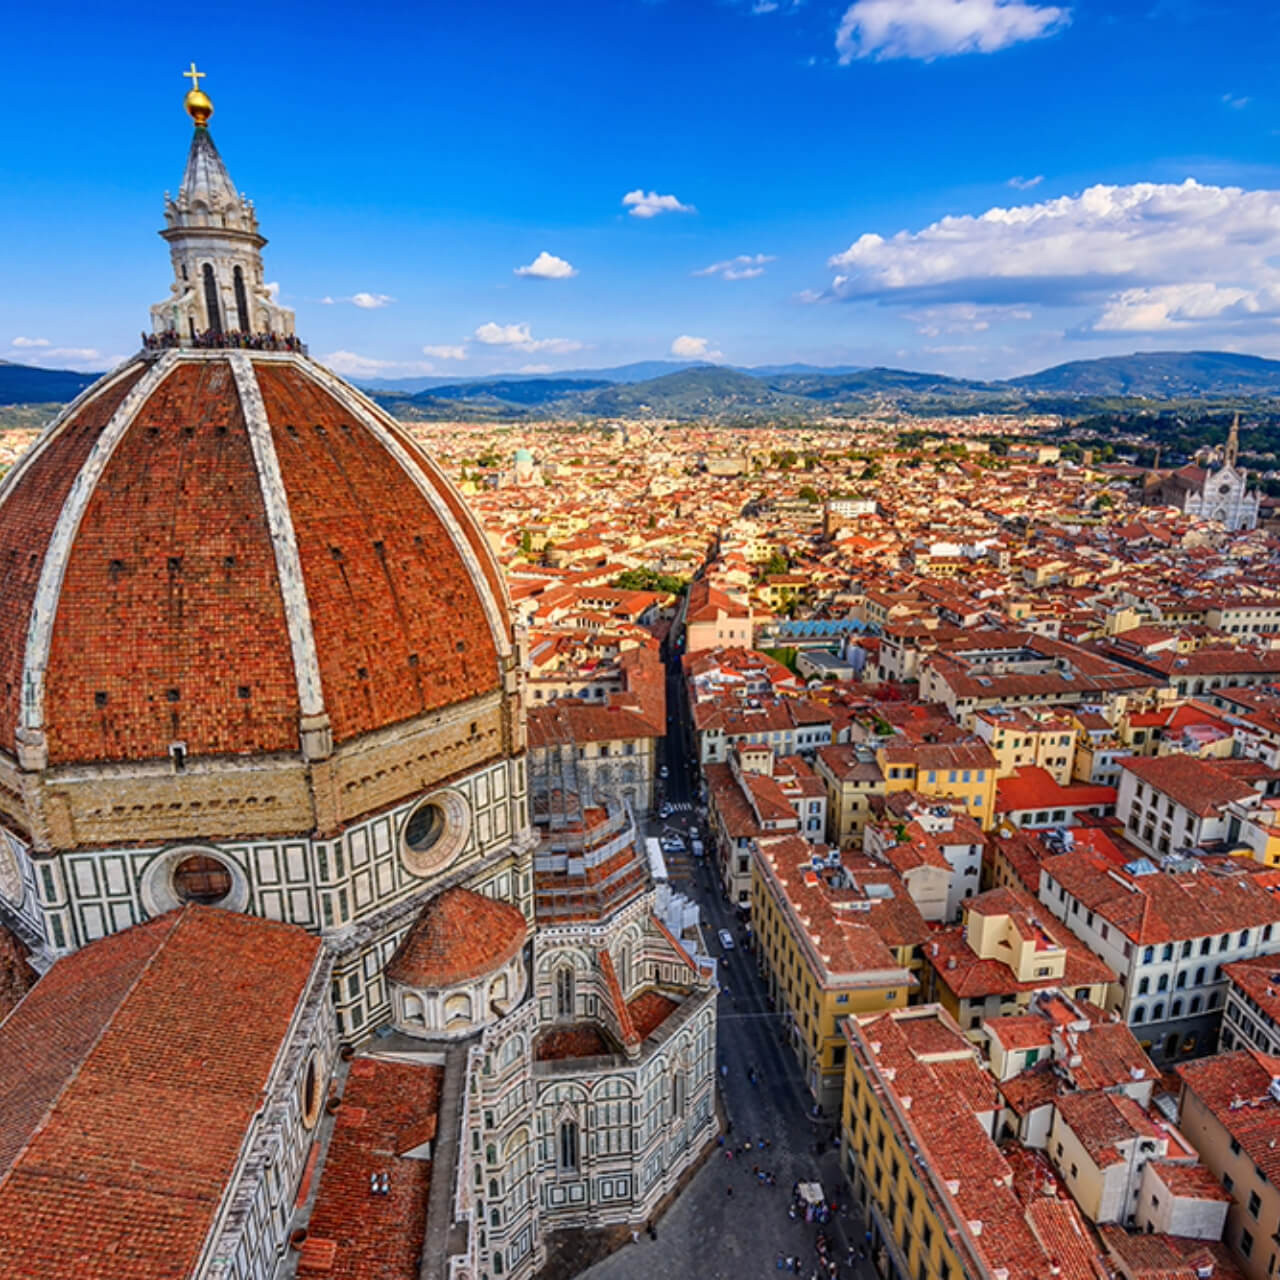 Aerial view of Florence with the iconic Duomo dominating the foreground, its red-tiled dome and intricate facade standing out against the cityscape and distant hills under a blue sky.